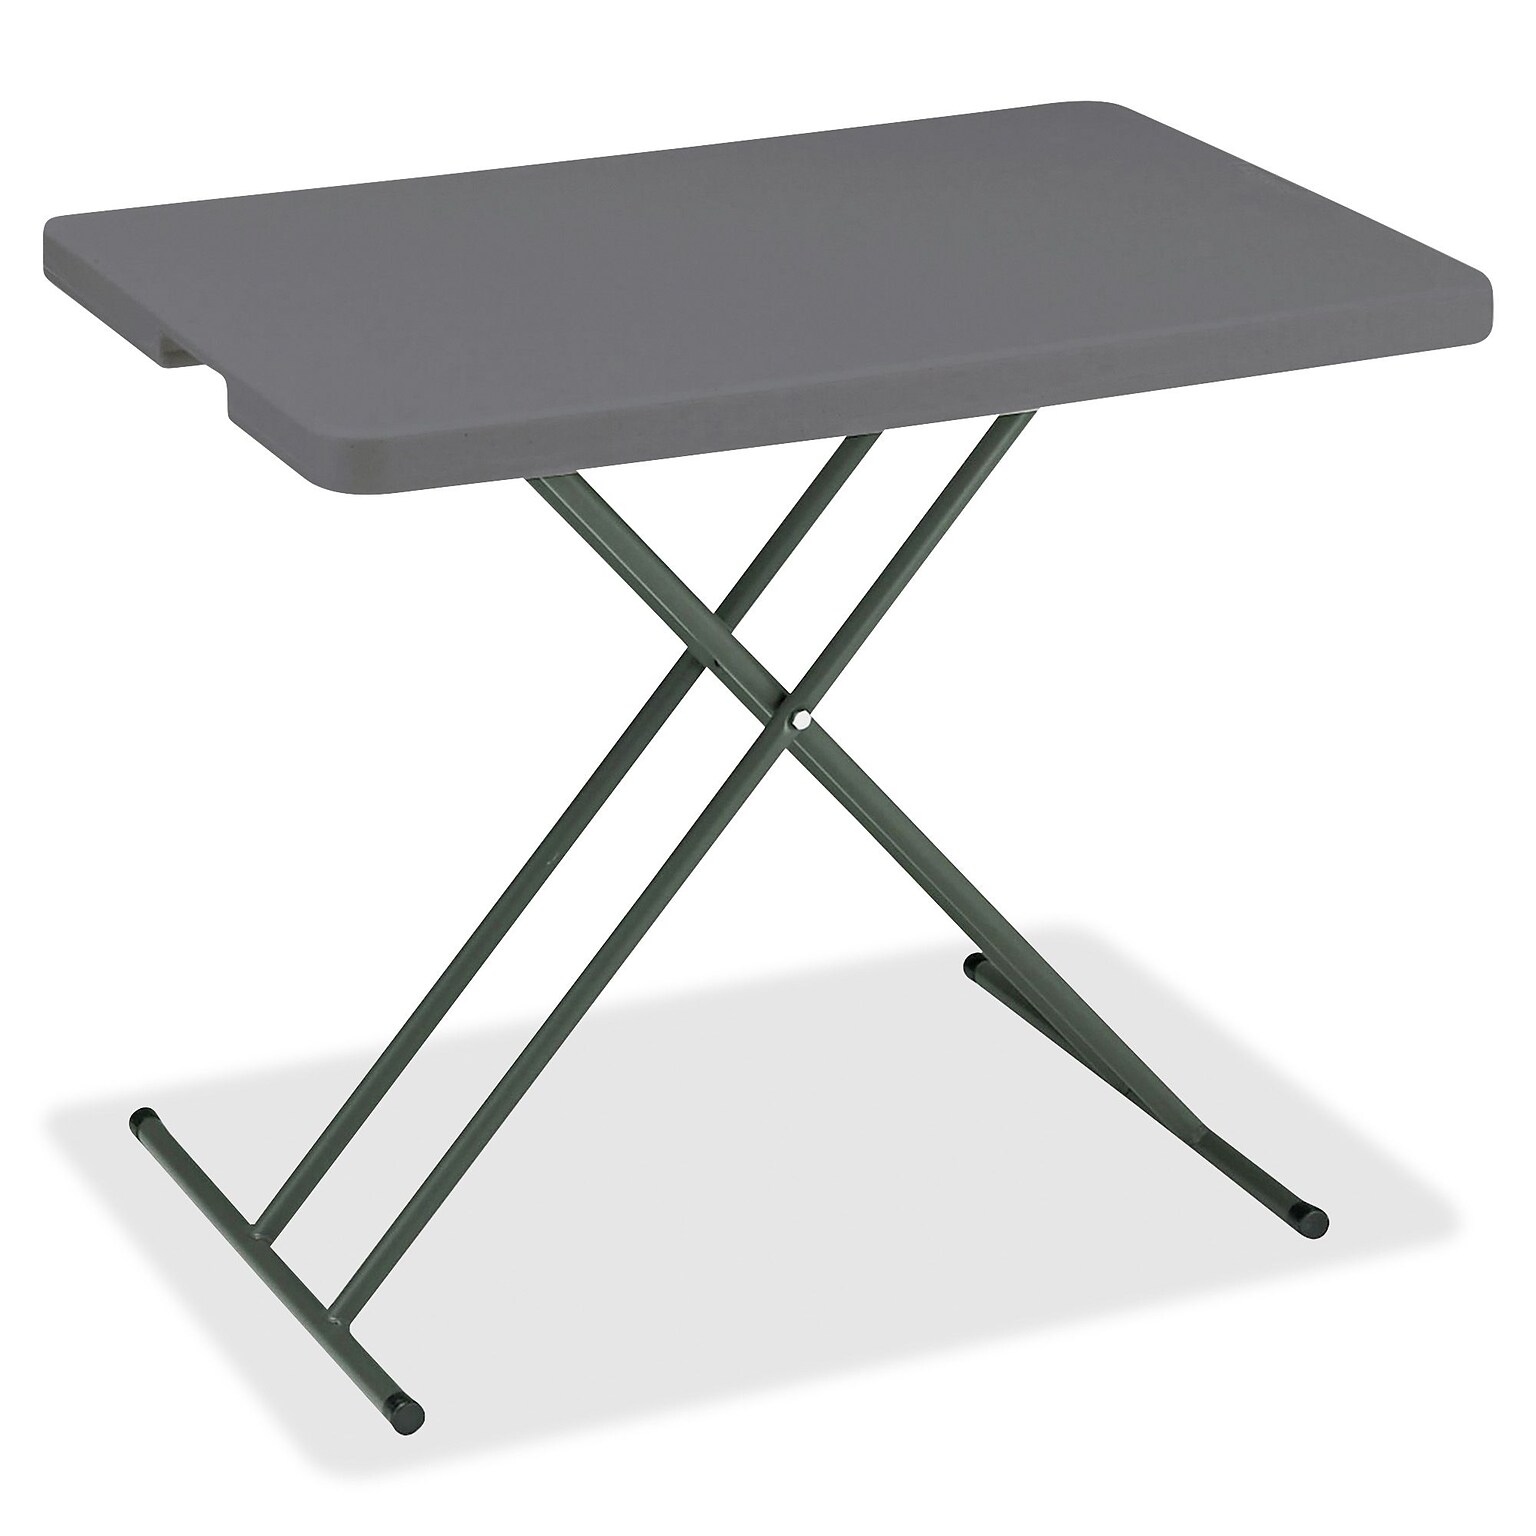 Iceberg IndestrucTable TOO Folding Table, Rectangle Top, X-shaped Base, 30 L x 20 W x 28 H, Charcoal